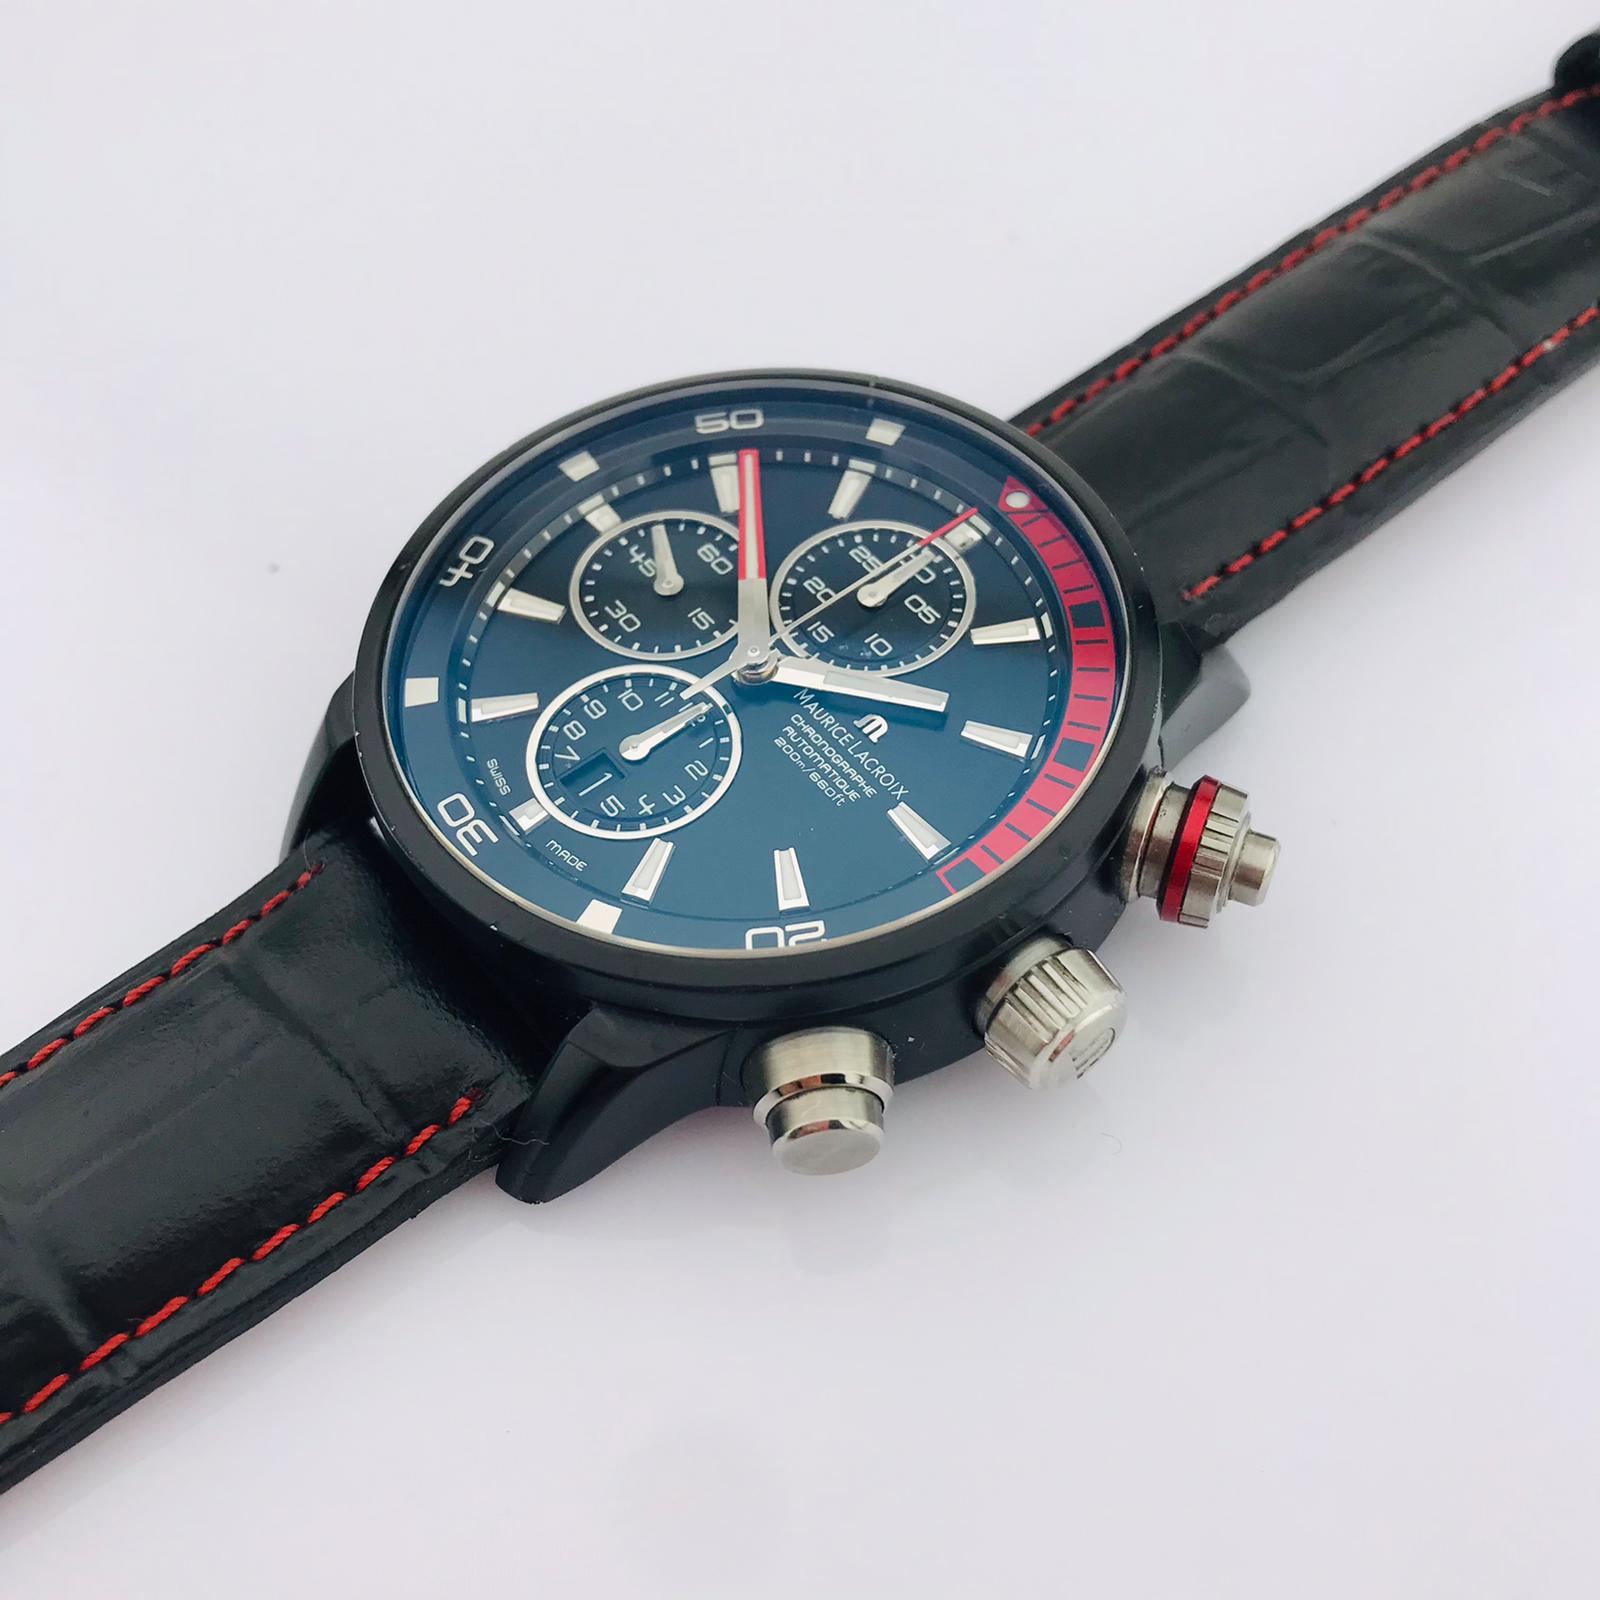 Maurice Lacroix / Pontos S Extreme Chronograph Limited Edition - Gentlmen's Steel Wrist Watch - Image 6 of 9